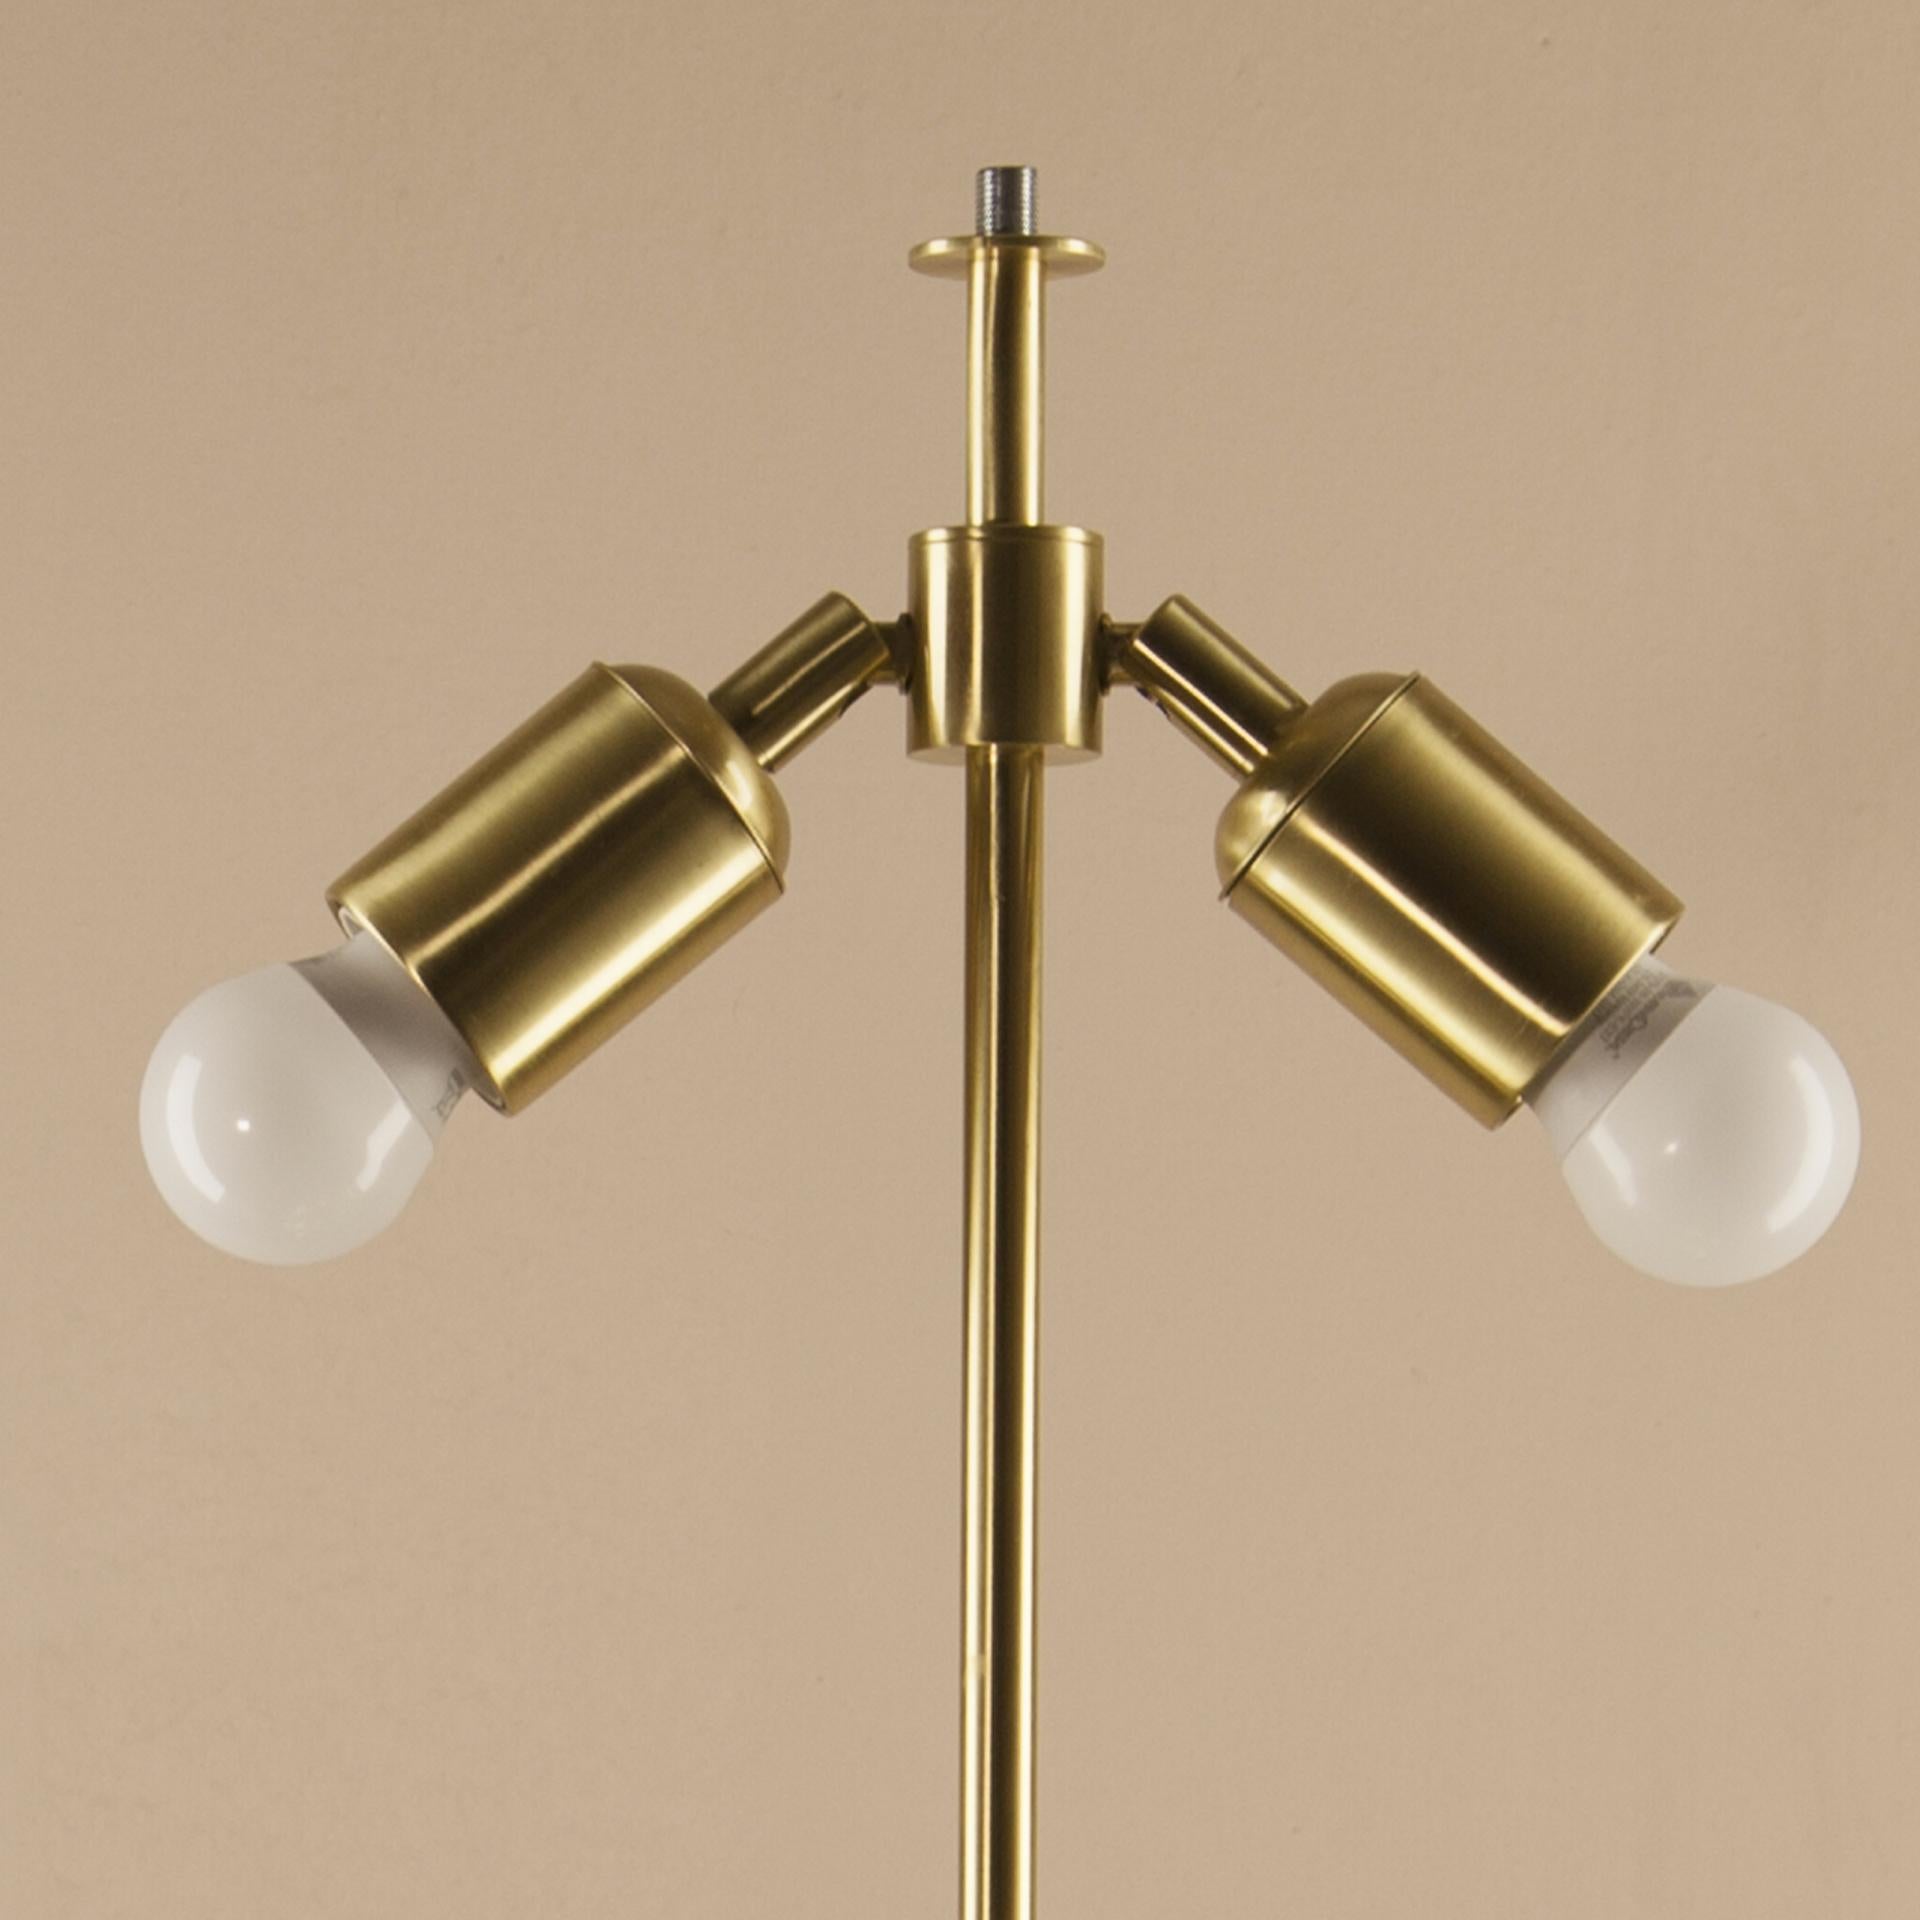 Plutone Table Lamp, Solid Brass Spheres, Florence Italy Production For Sale 6